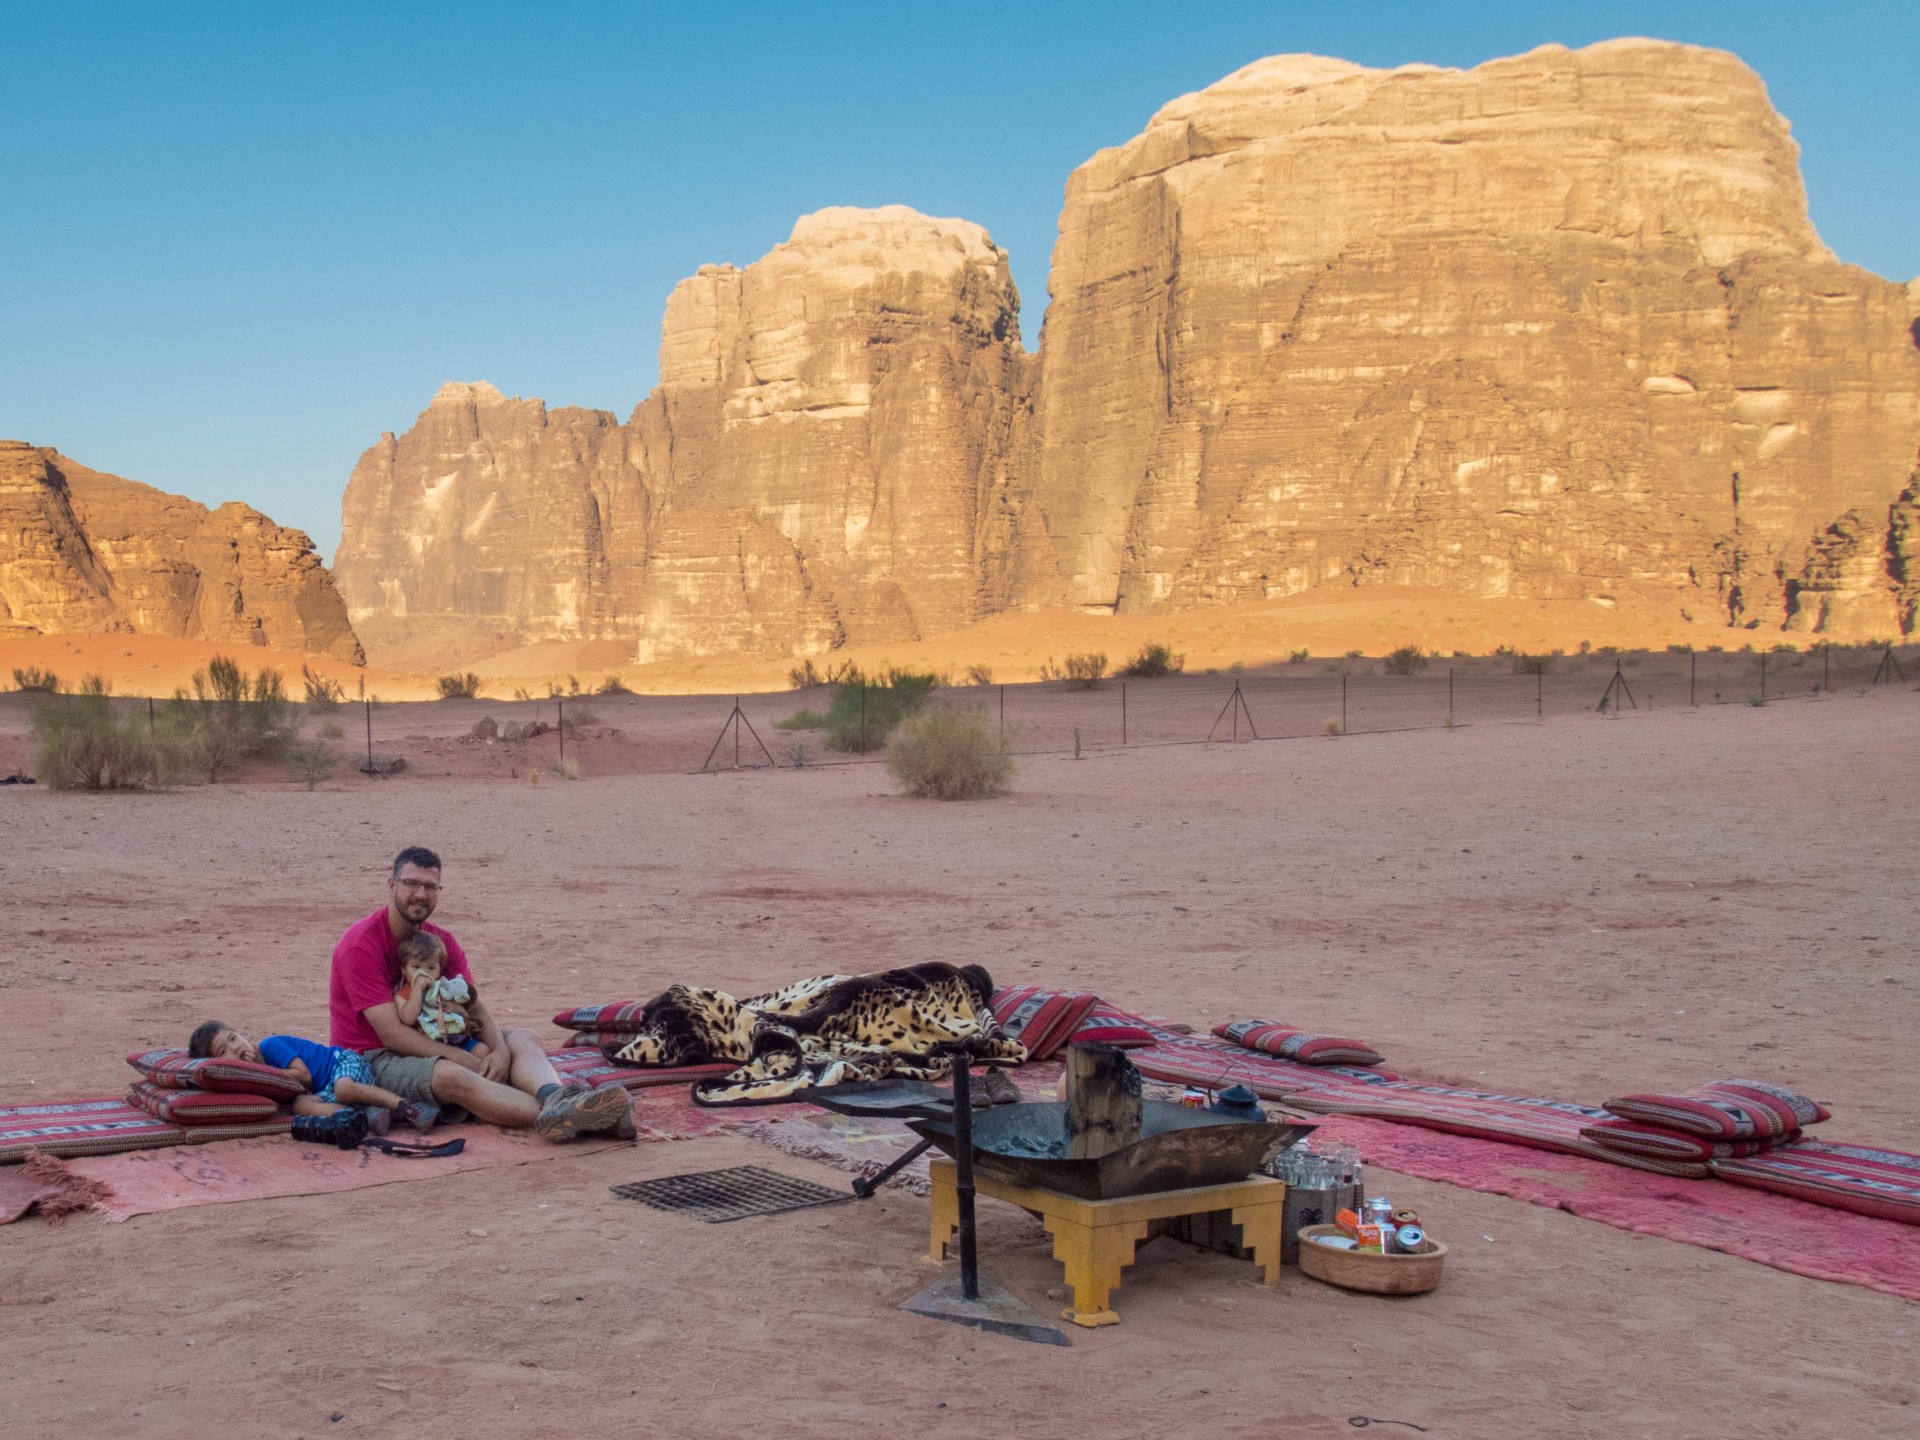 Father and son sit by a campfire in Wadi Rum